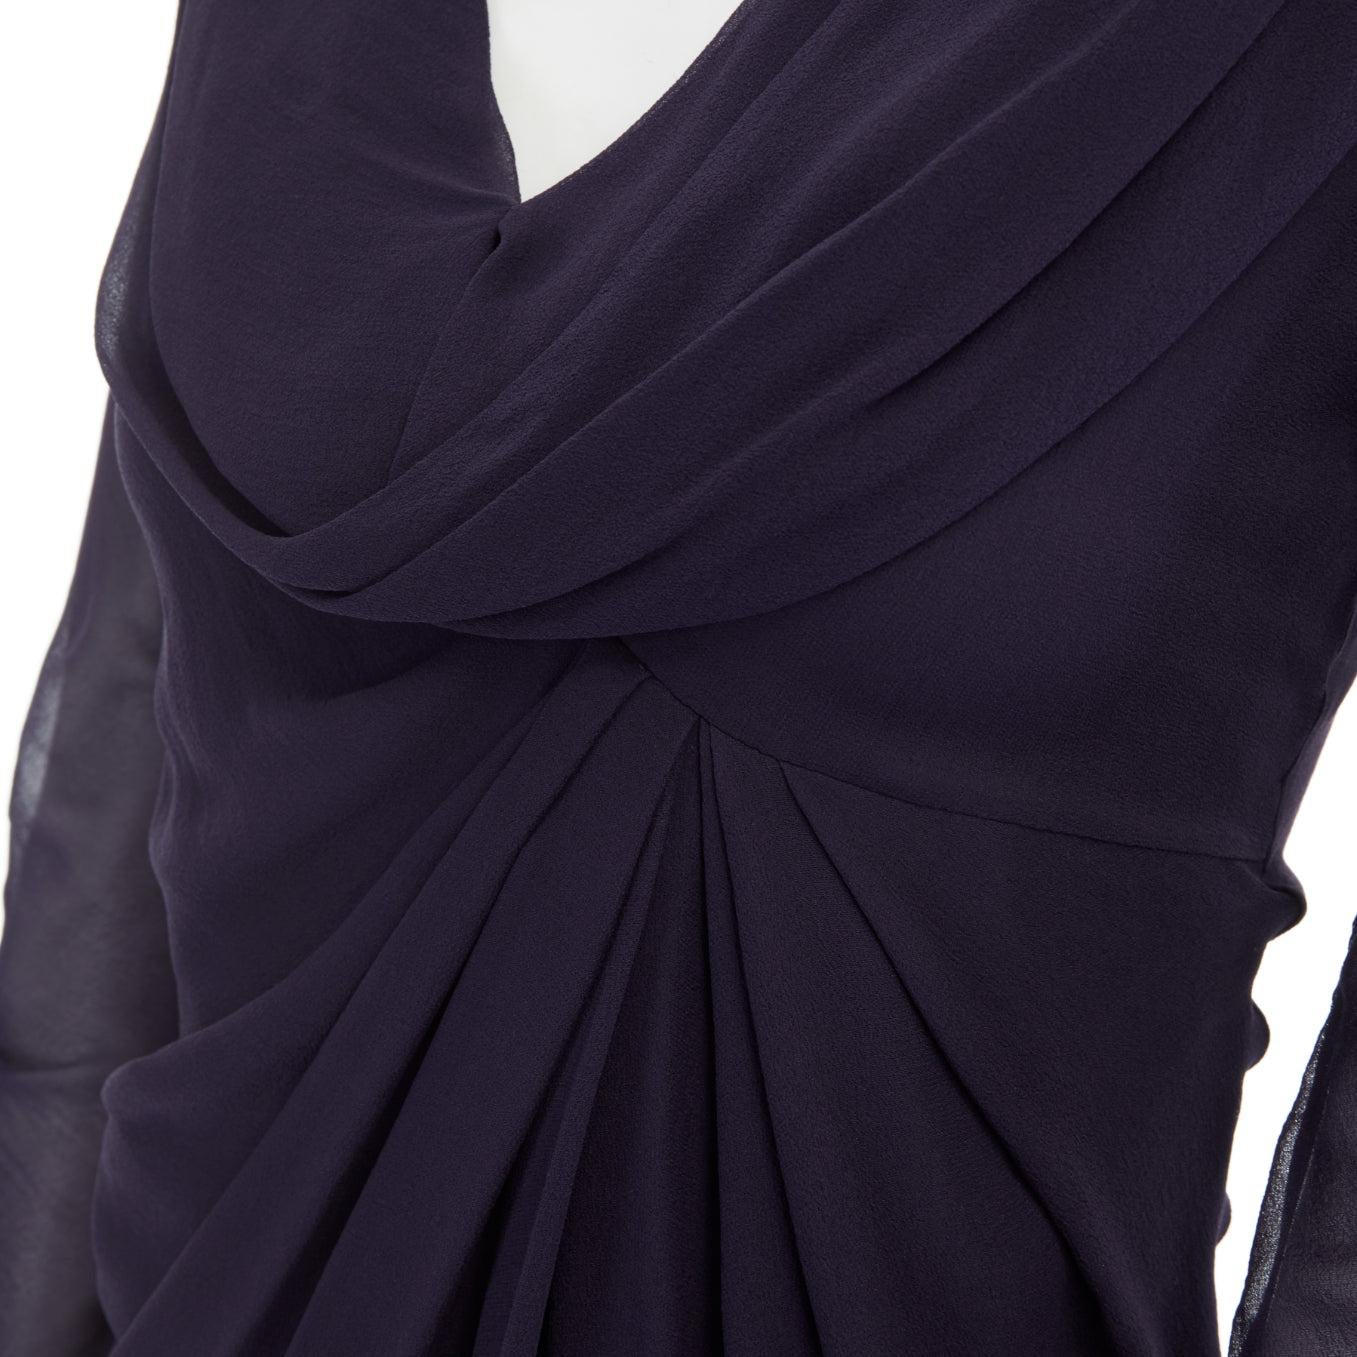 VALENTINO navy blue silk draped front waterfall tier hem sheer sleeve dress US2
Reference: LNKO/A00506
Brand: Valentino
Designer: Pier Paolo Piccioli
Material: Silk
Color: Blue
Pattern: Solid
Closure: Zip
Extra Details: Silk. Navy blue. Draped